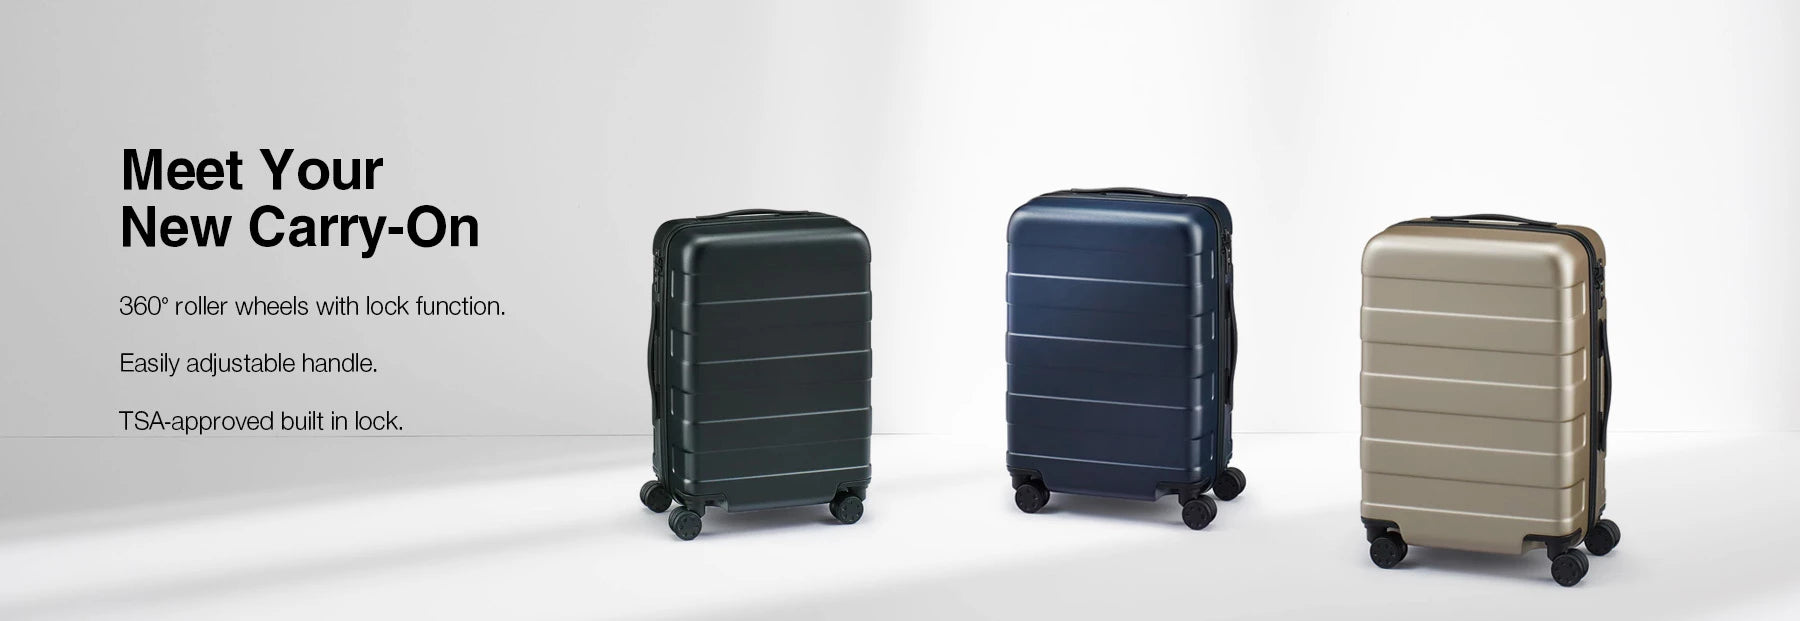 Meet Your New Carry On- 36L Luggage 360 Wheels, easy adjustable handle, and tsa-approved lock.